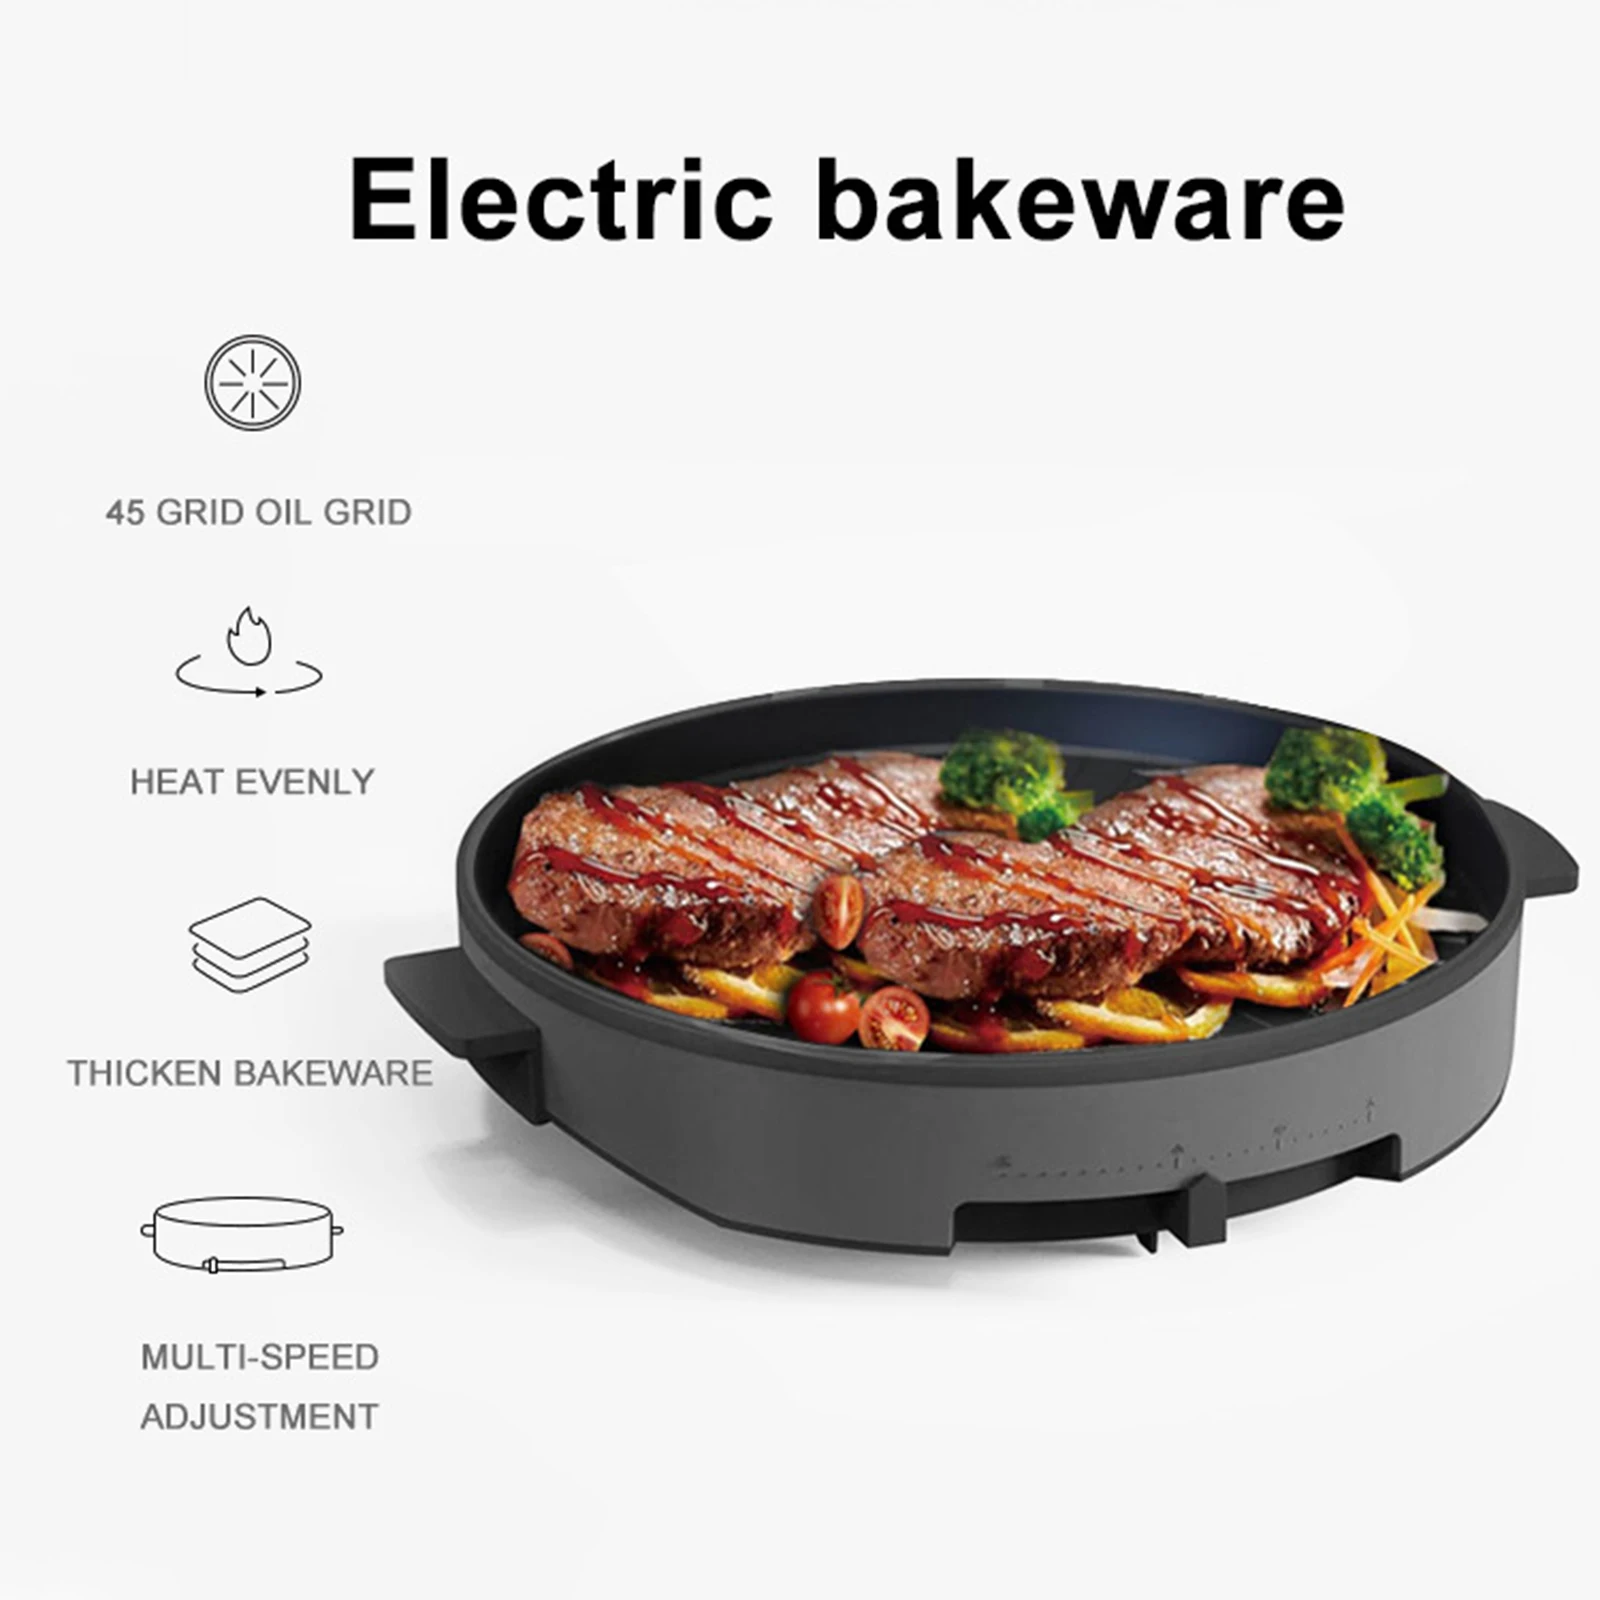 portable multi function oven bbq grill plate smokeless detachable bbq grill metal electric bakeware party kitchen tools free global shipping